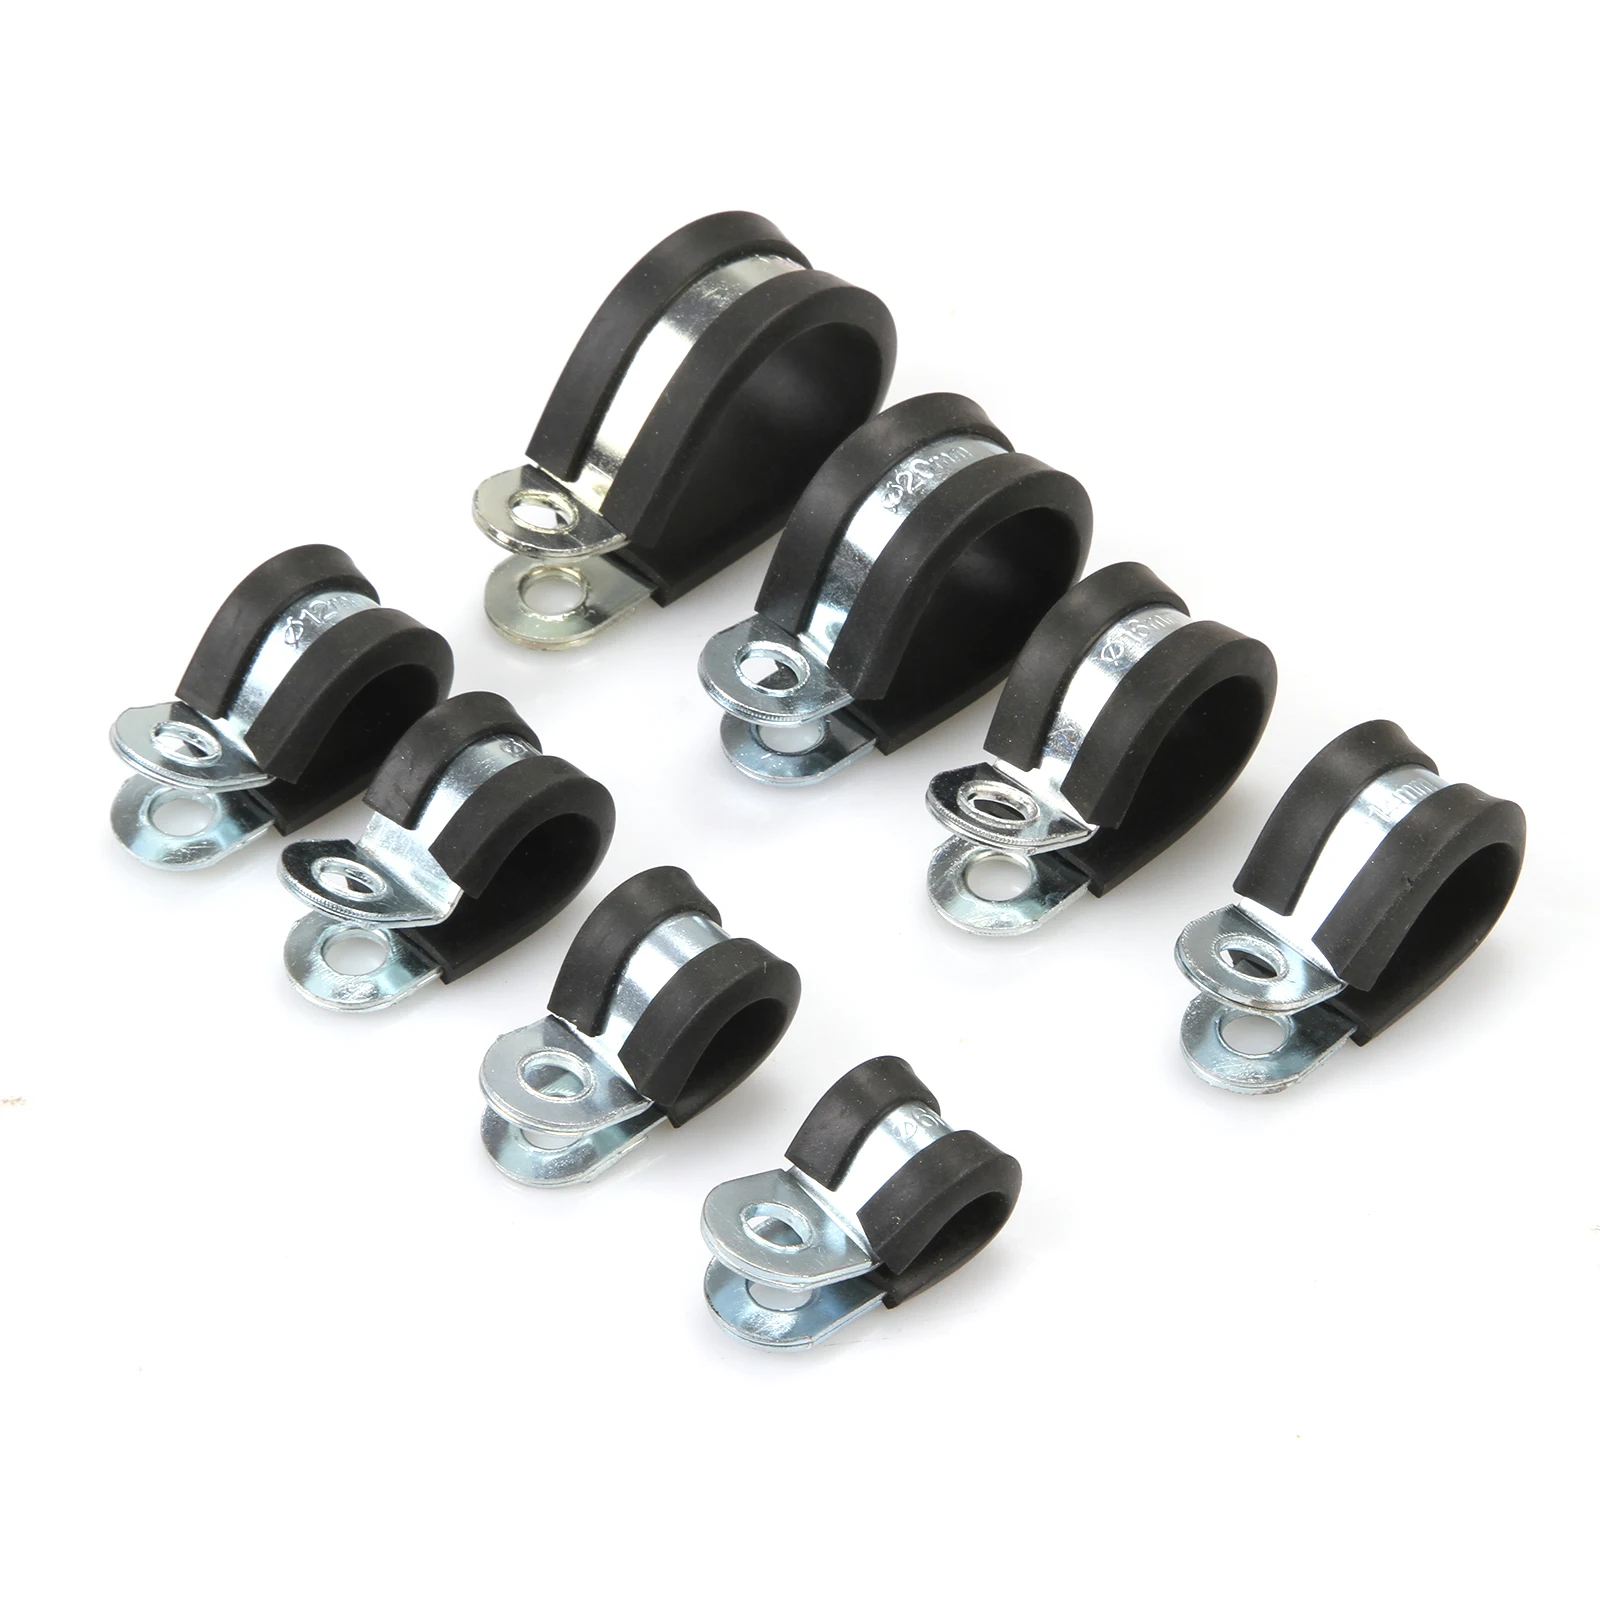 10x Zinc Plated Steel Rubber Lined P Clips Auto Marine Wire Cable Tidy P Clip